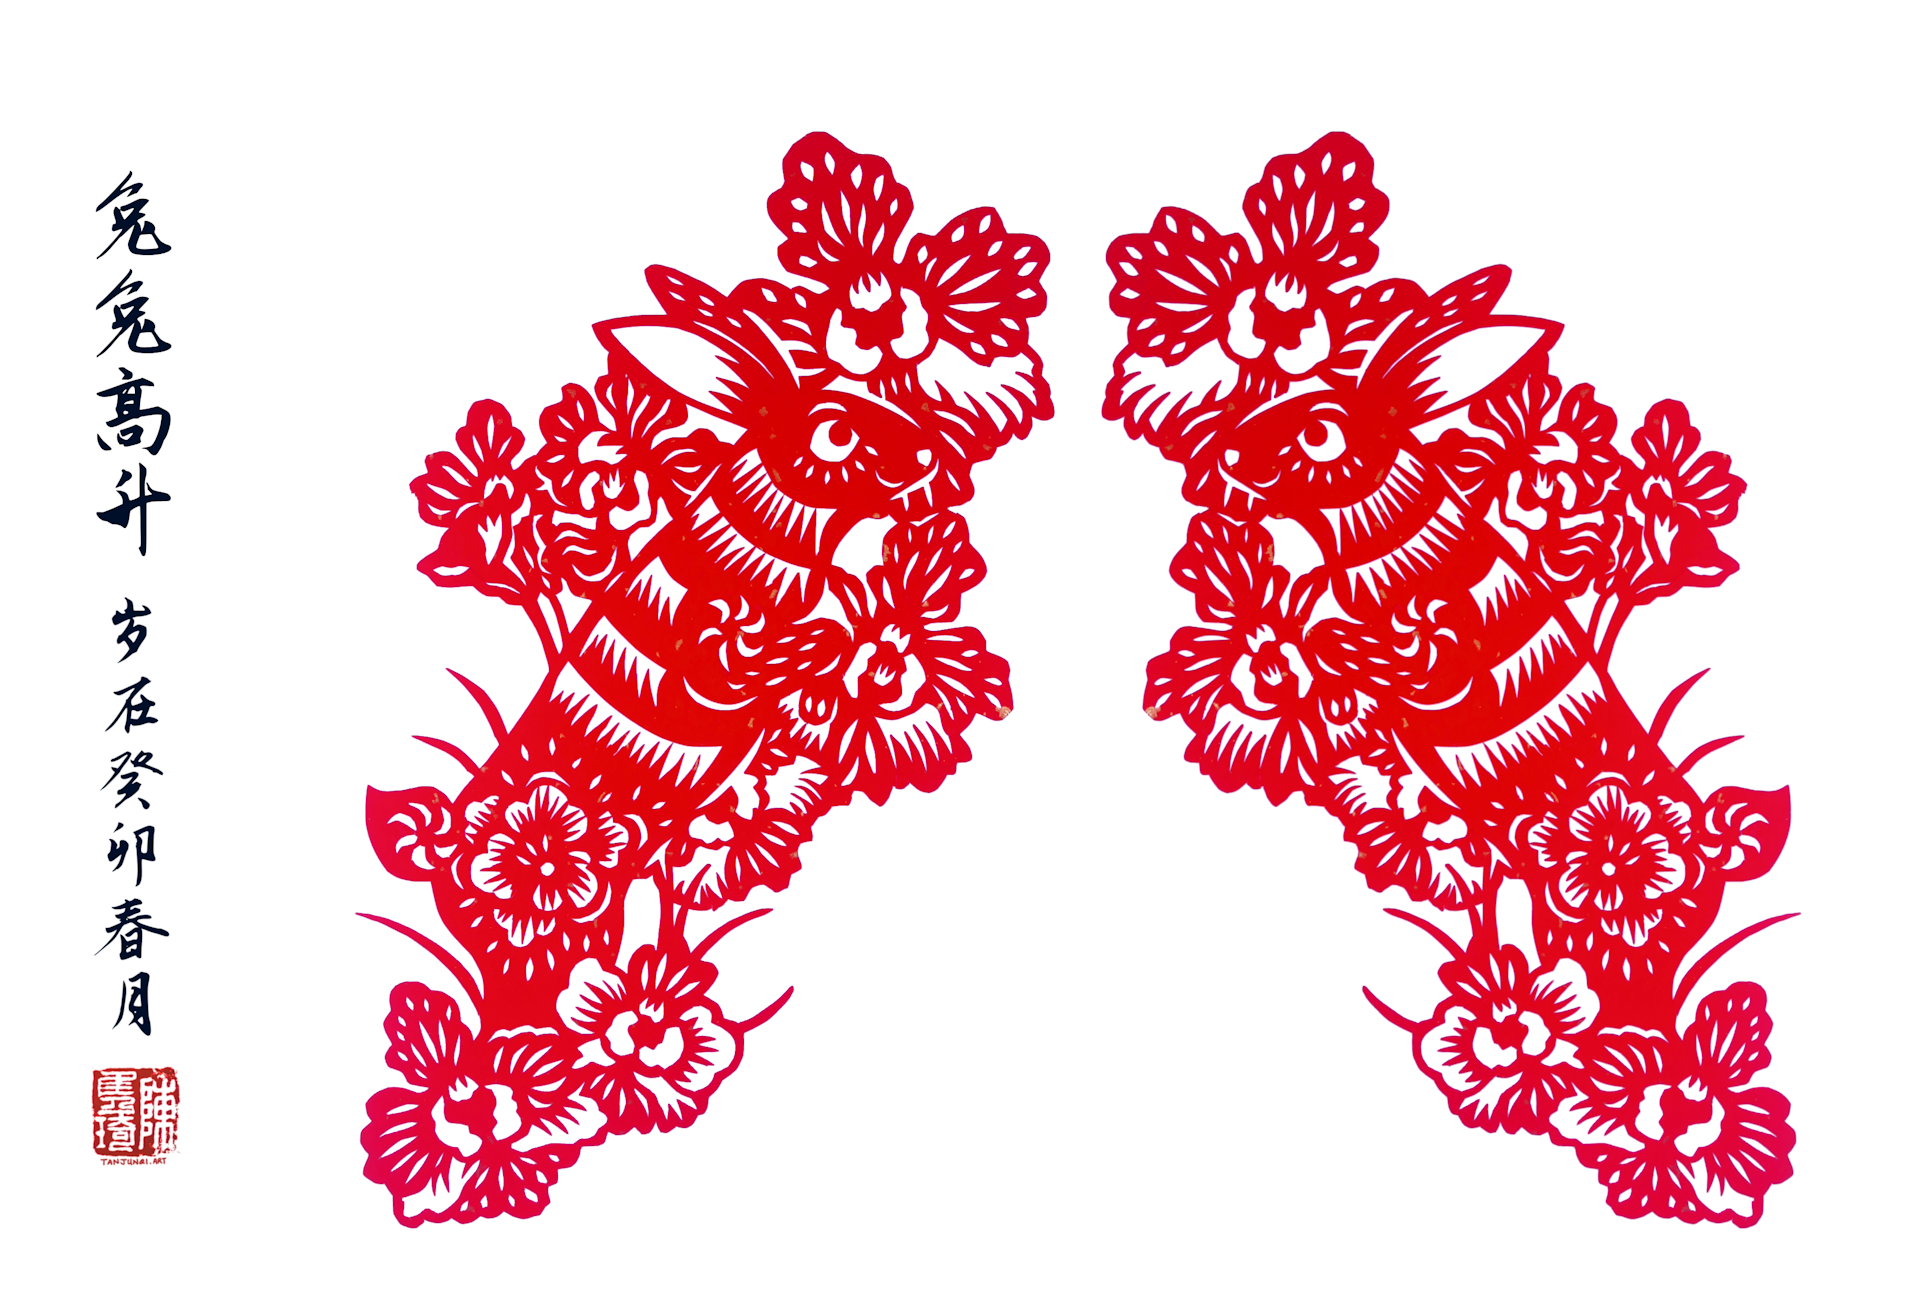 Pair of Chinese papercuts, each showing a rabbit bounding upwards amidst orchid blossoms